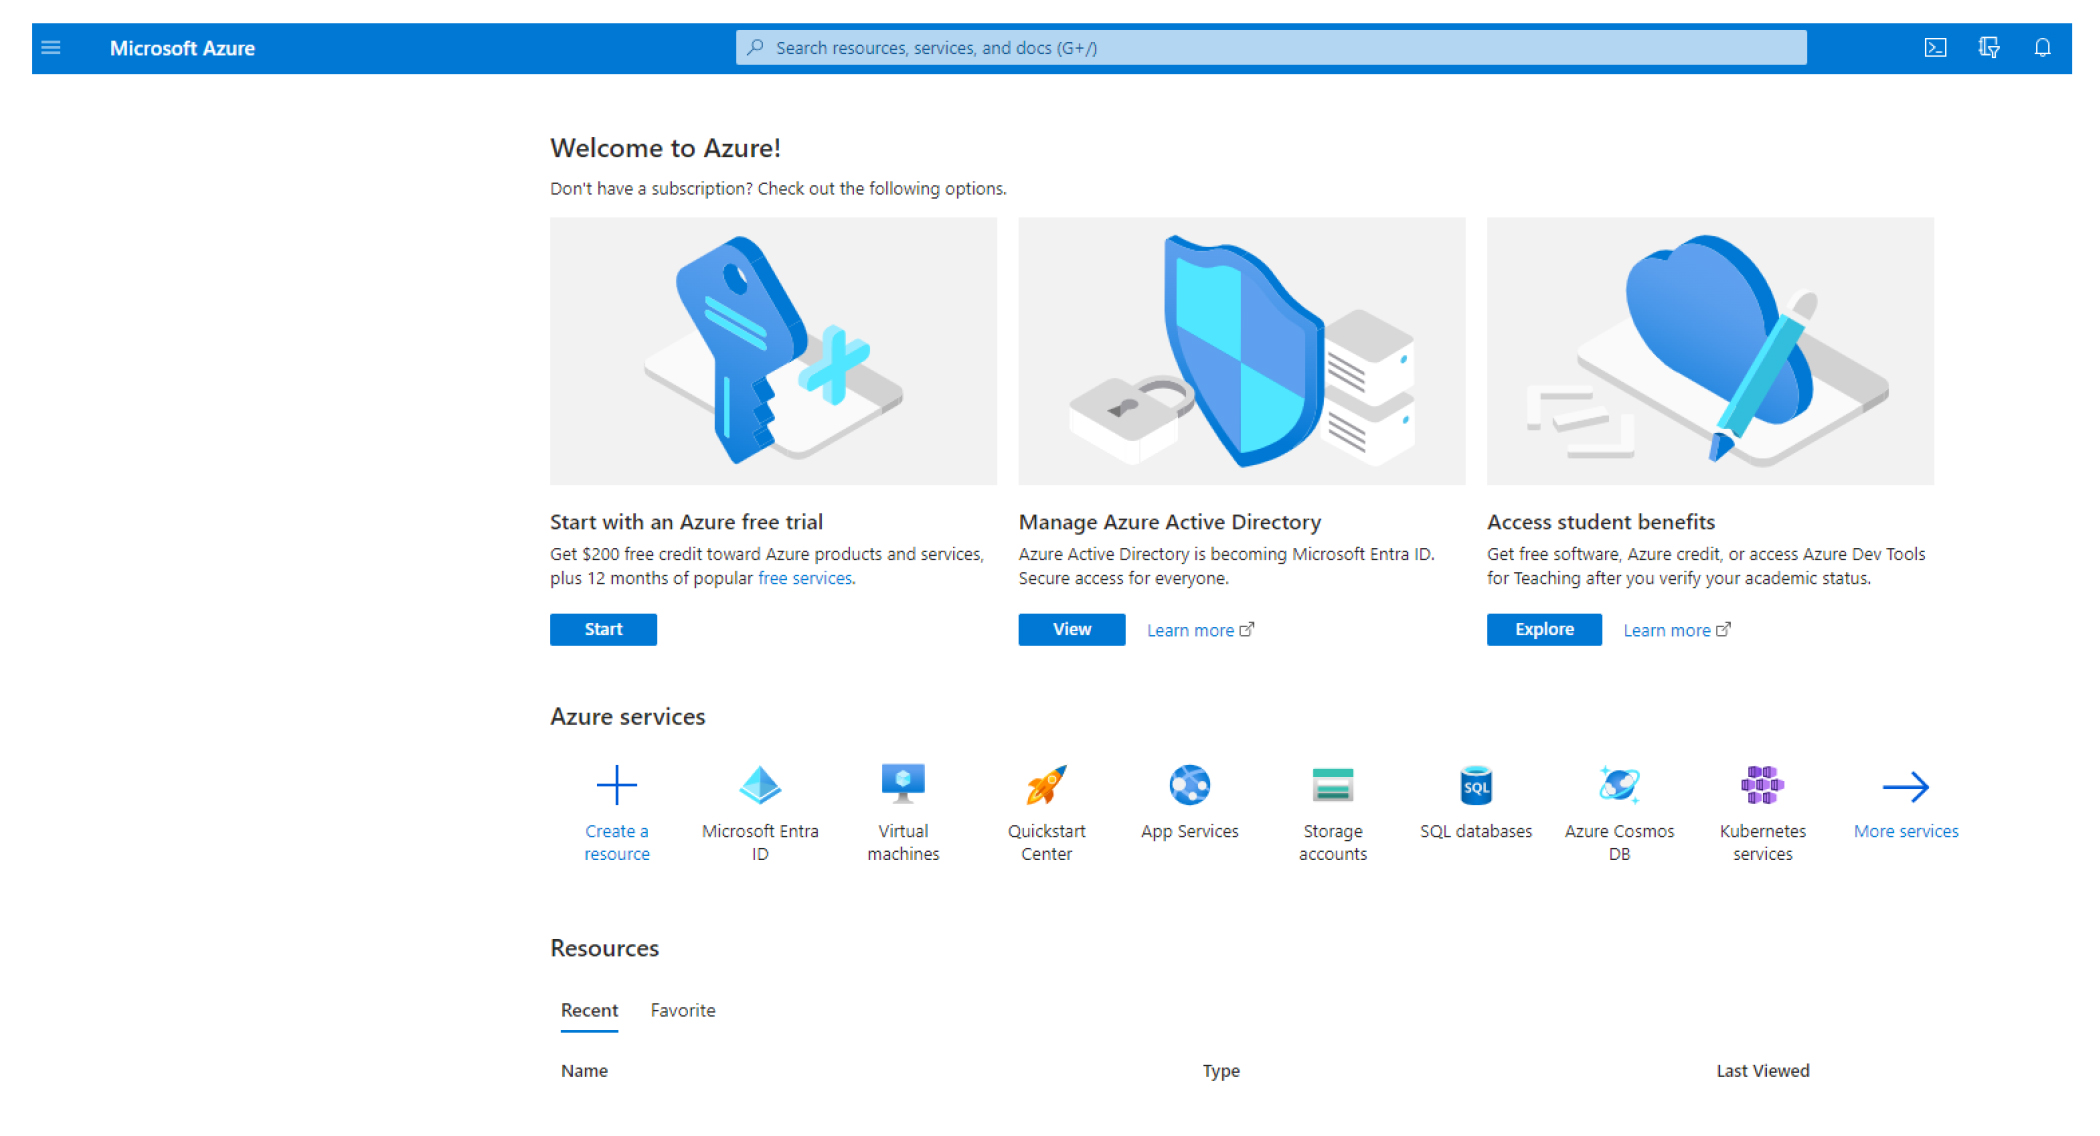 A screenshot showing the home page of the  Microsoft Azure portal.